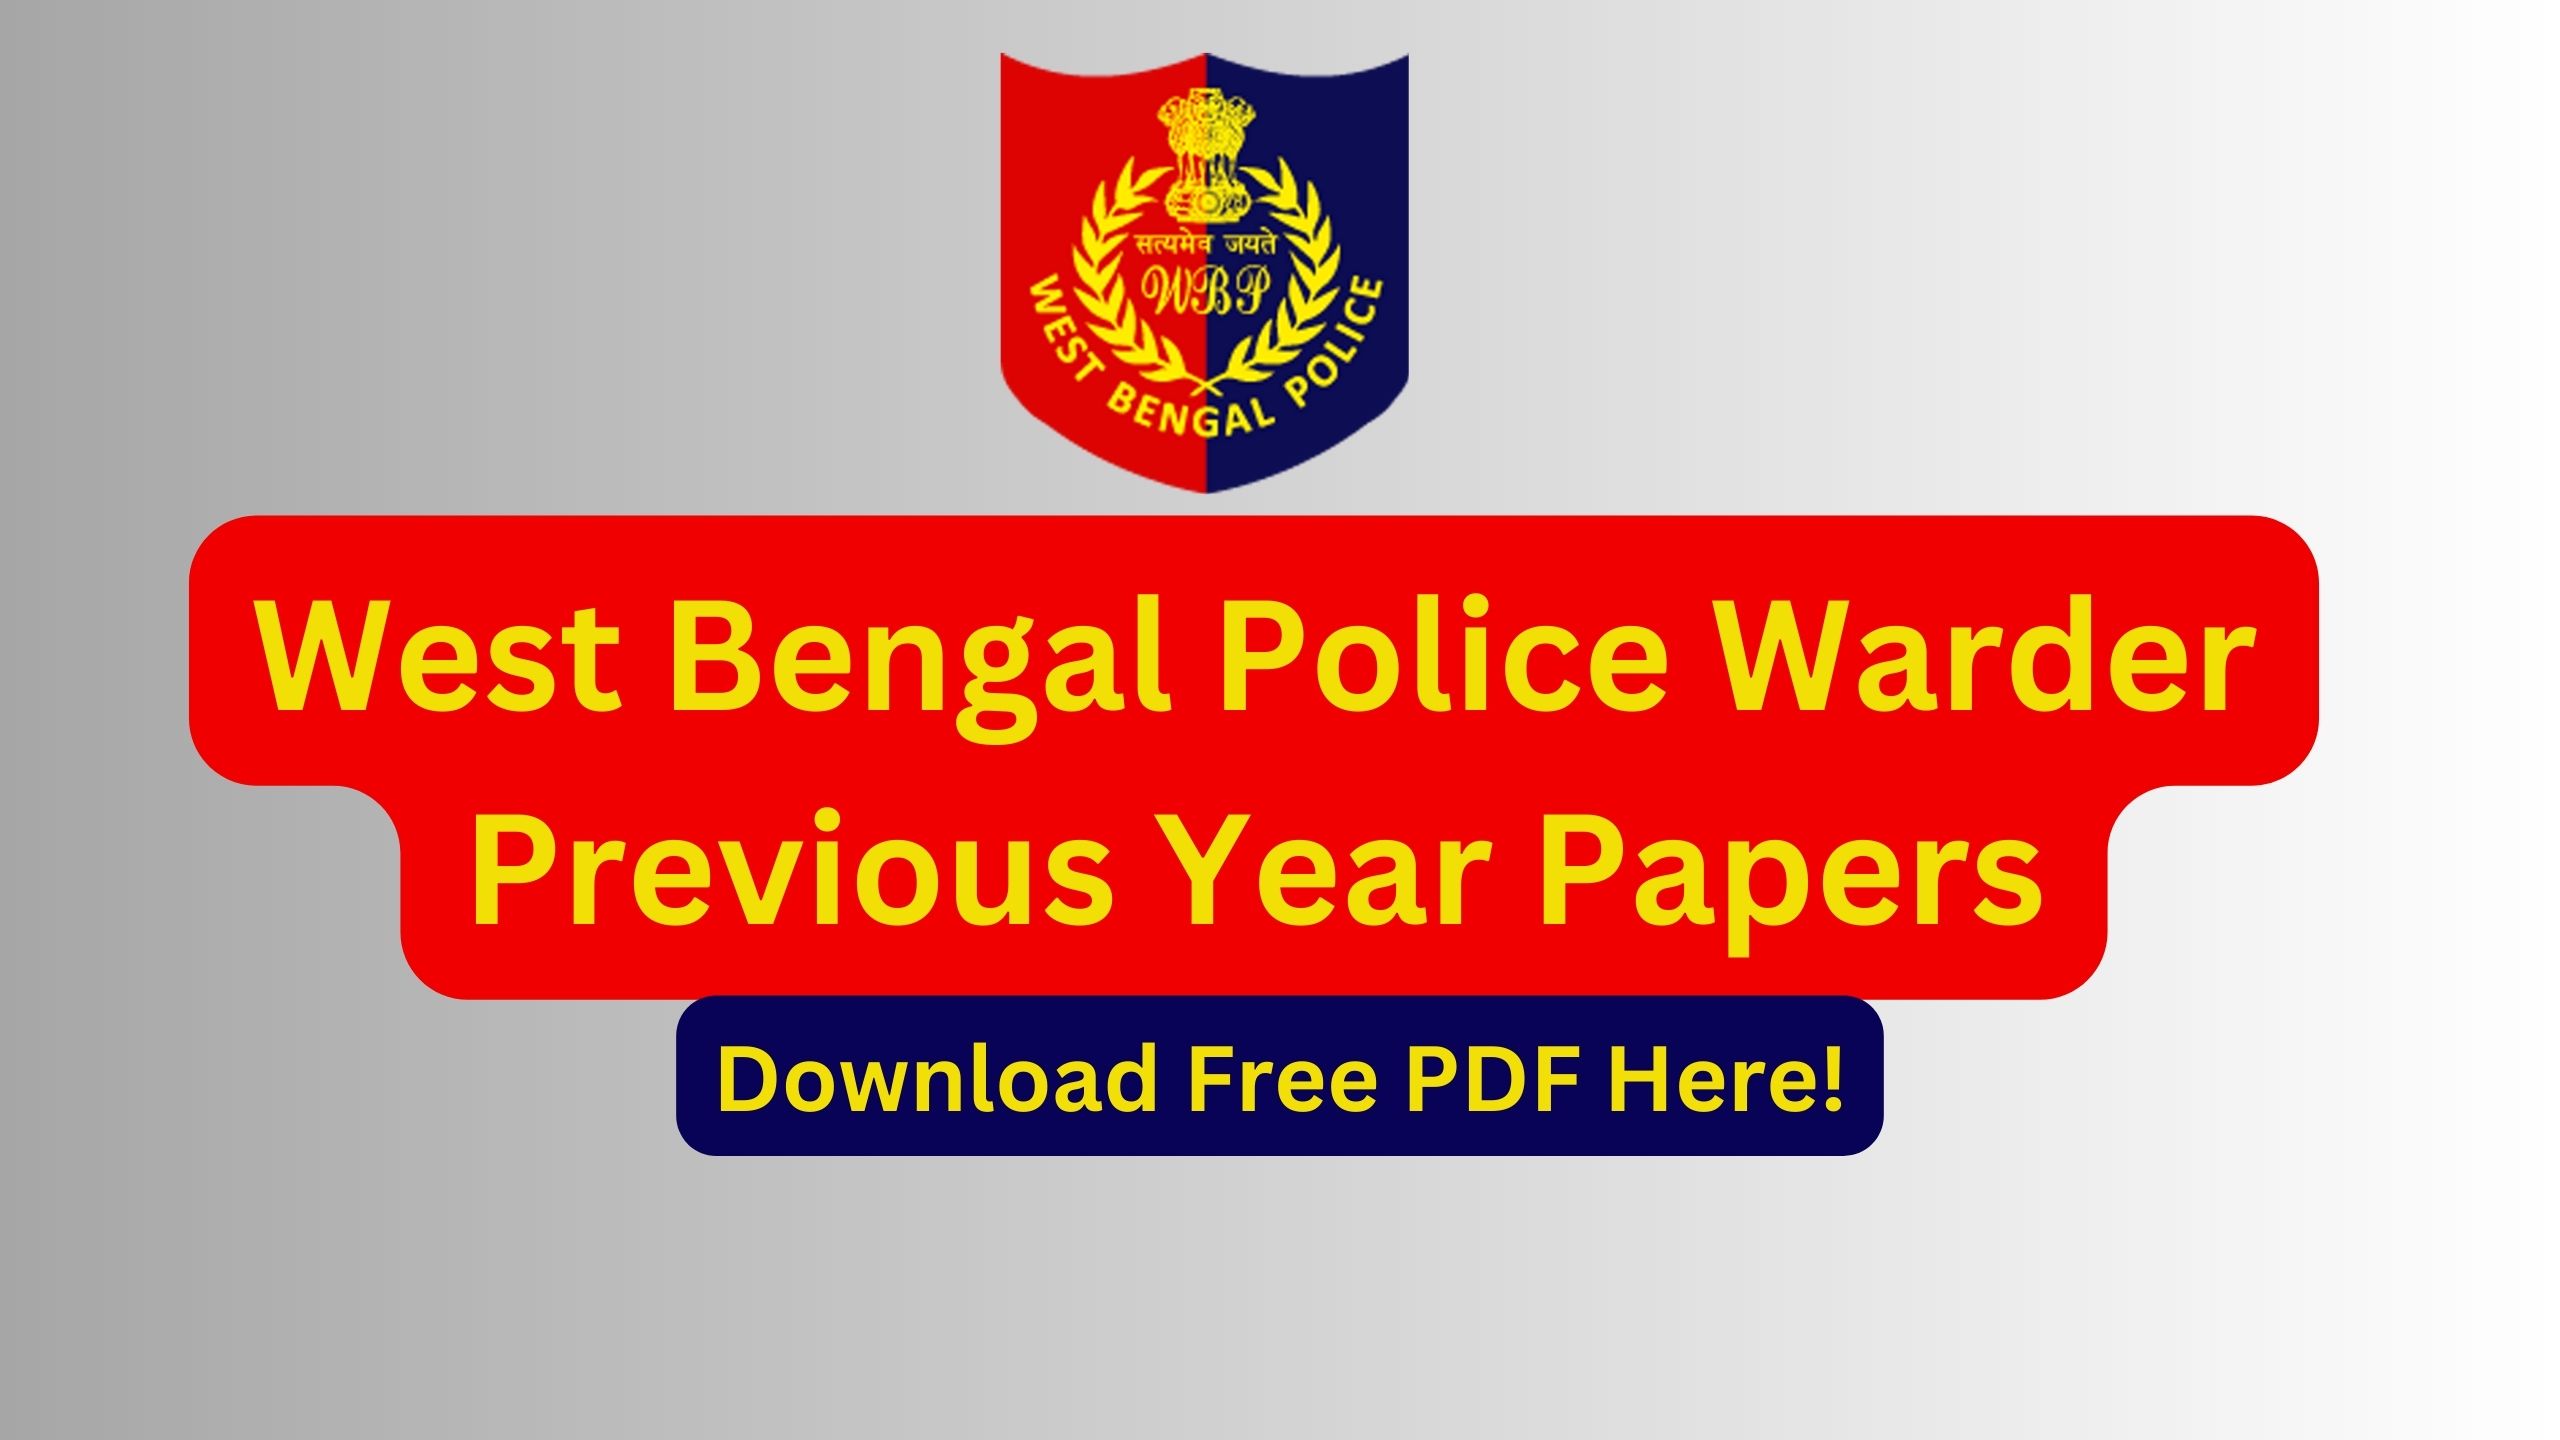 West Bengal Police Warder Previous Year Papers